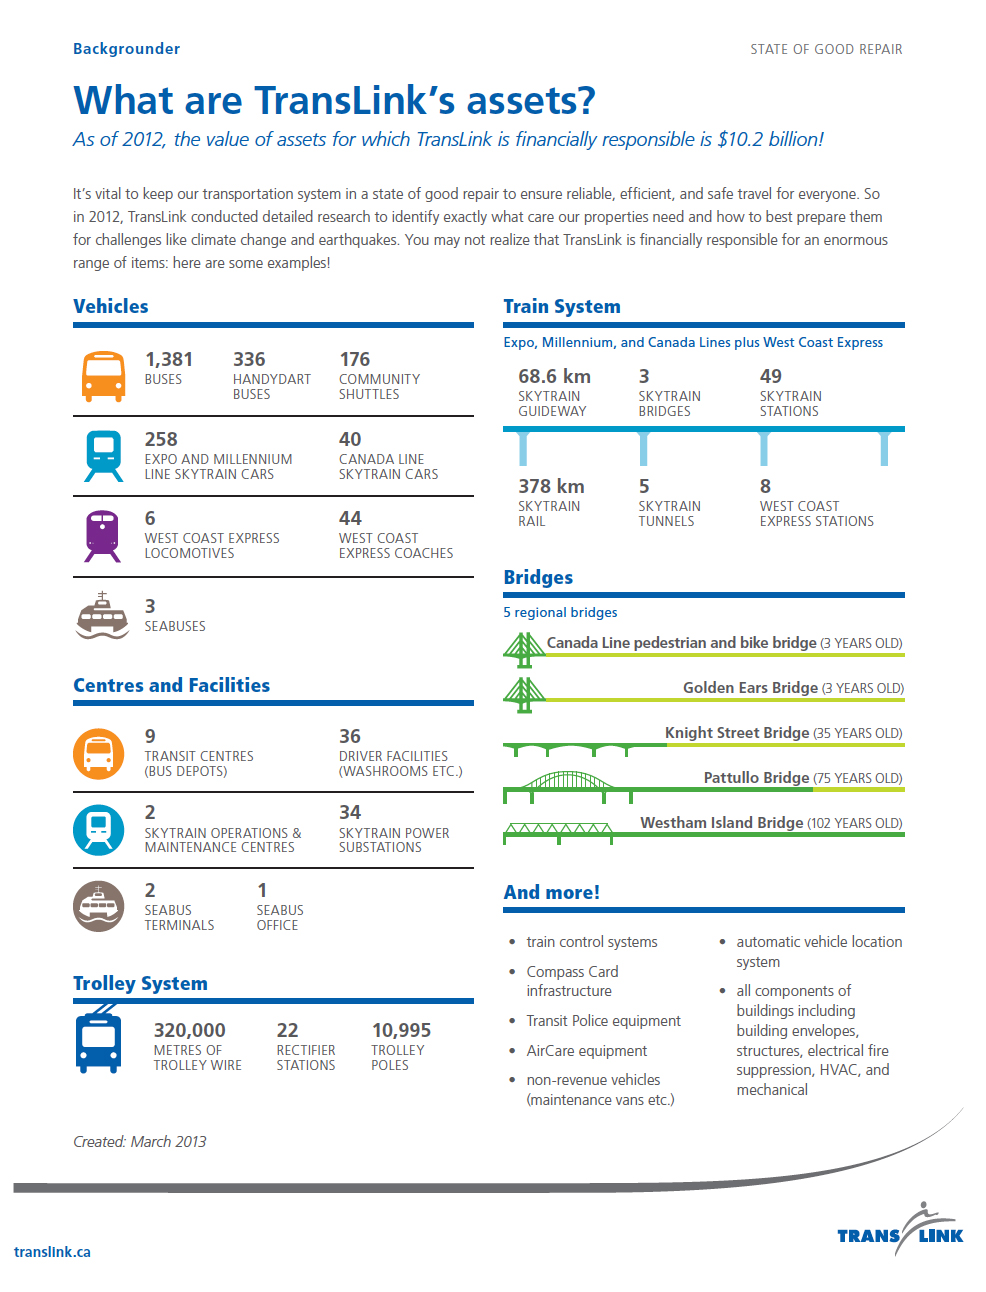 An infographic summary of the assets TransLink manages as of 2012! Click for a larger version.